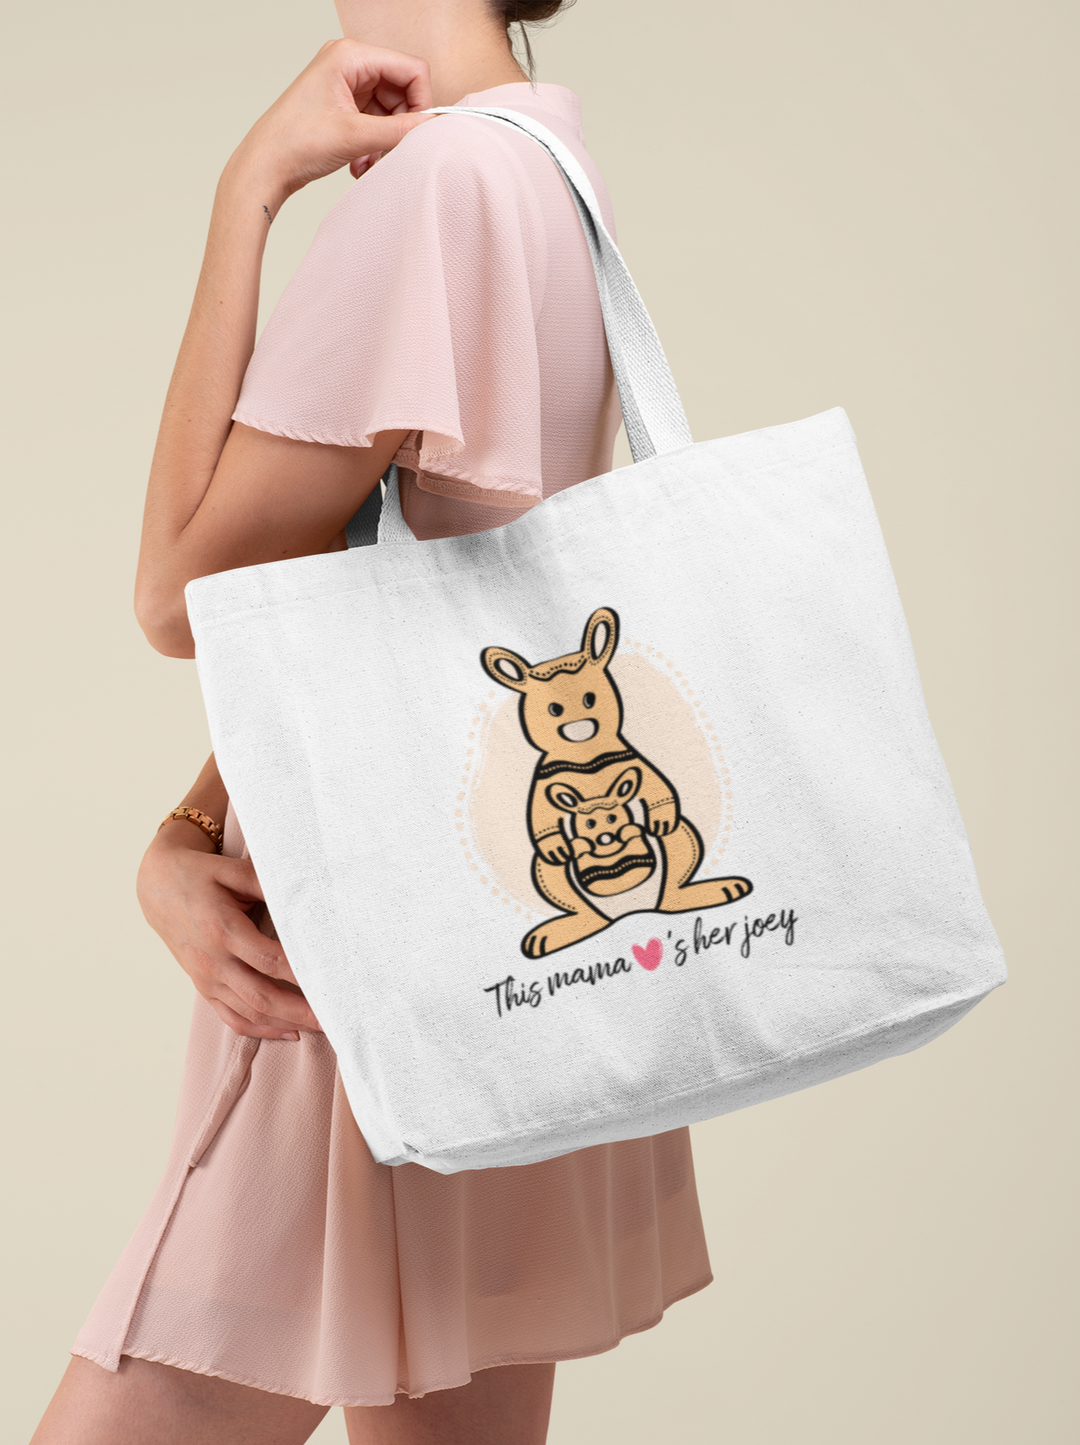 Joey's Journey - Cotton Tote Bag